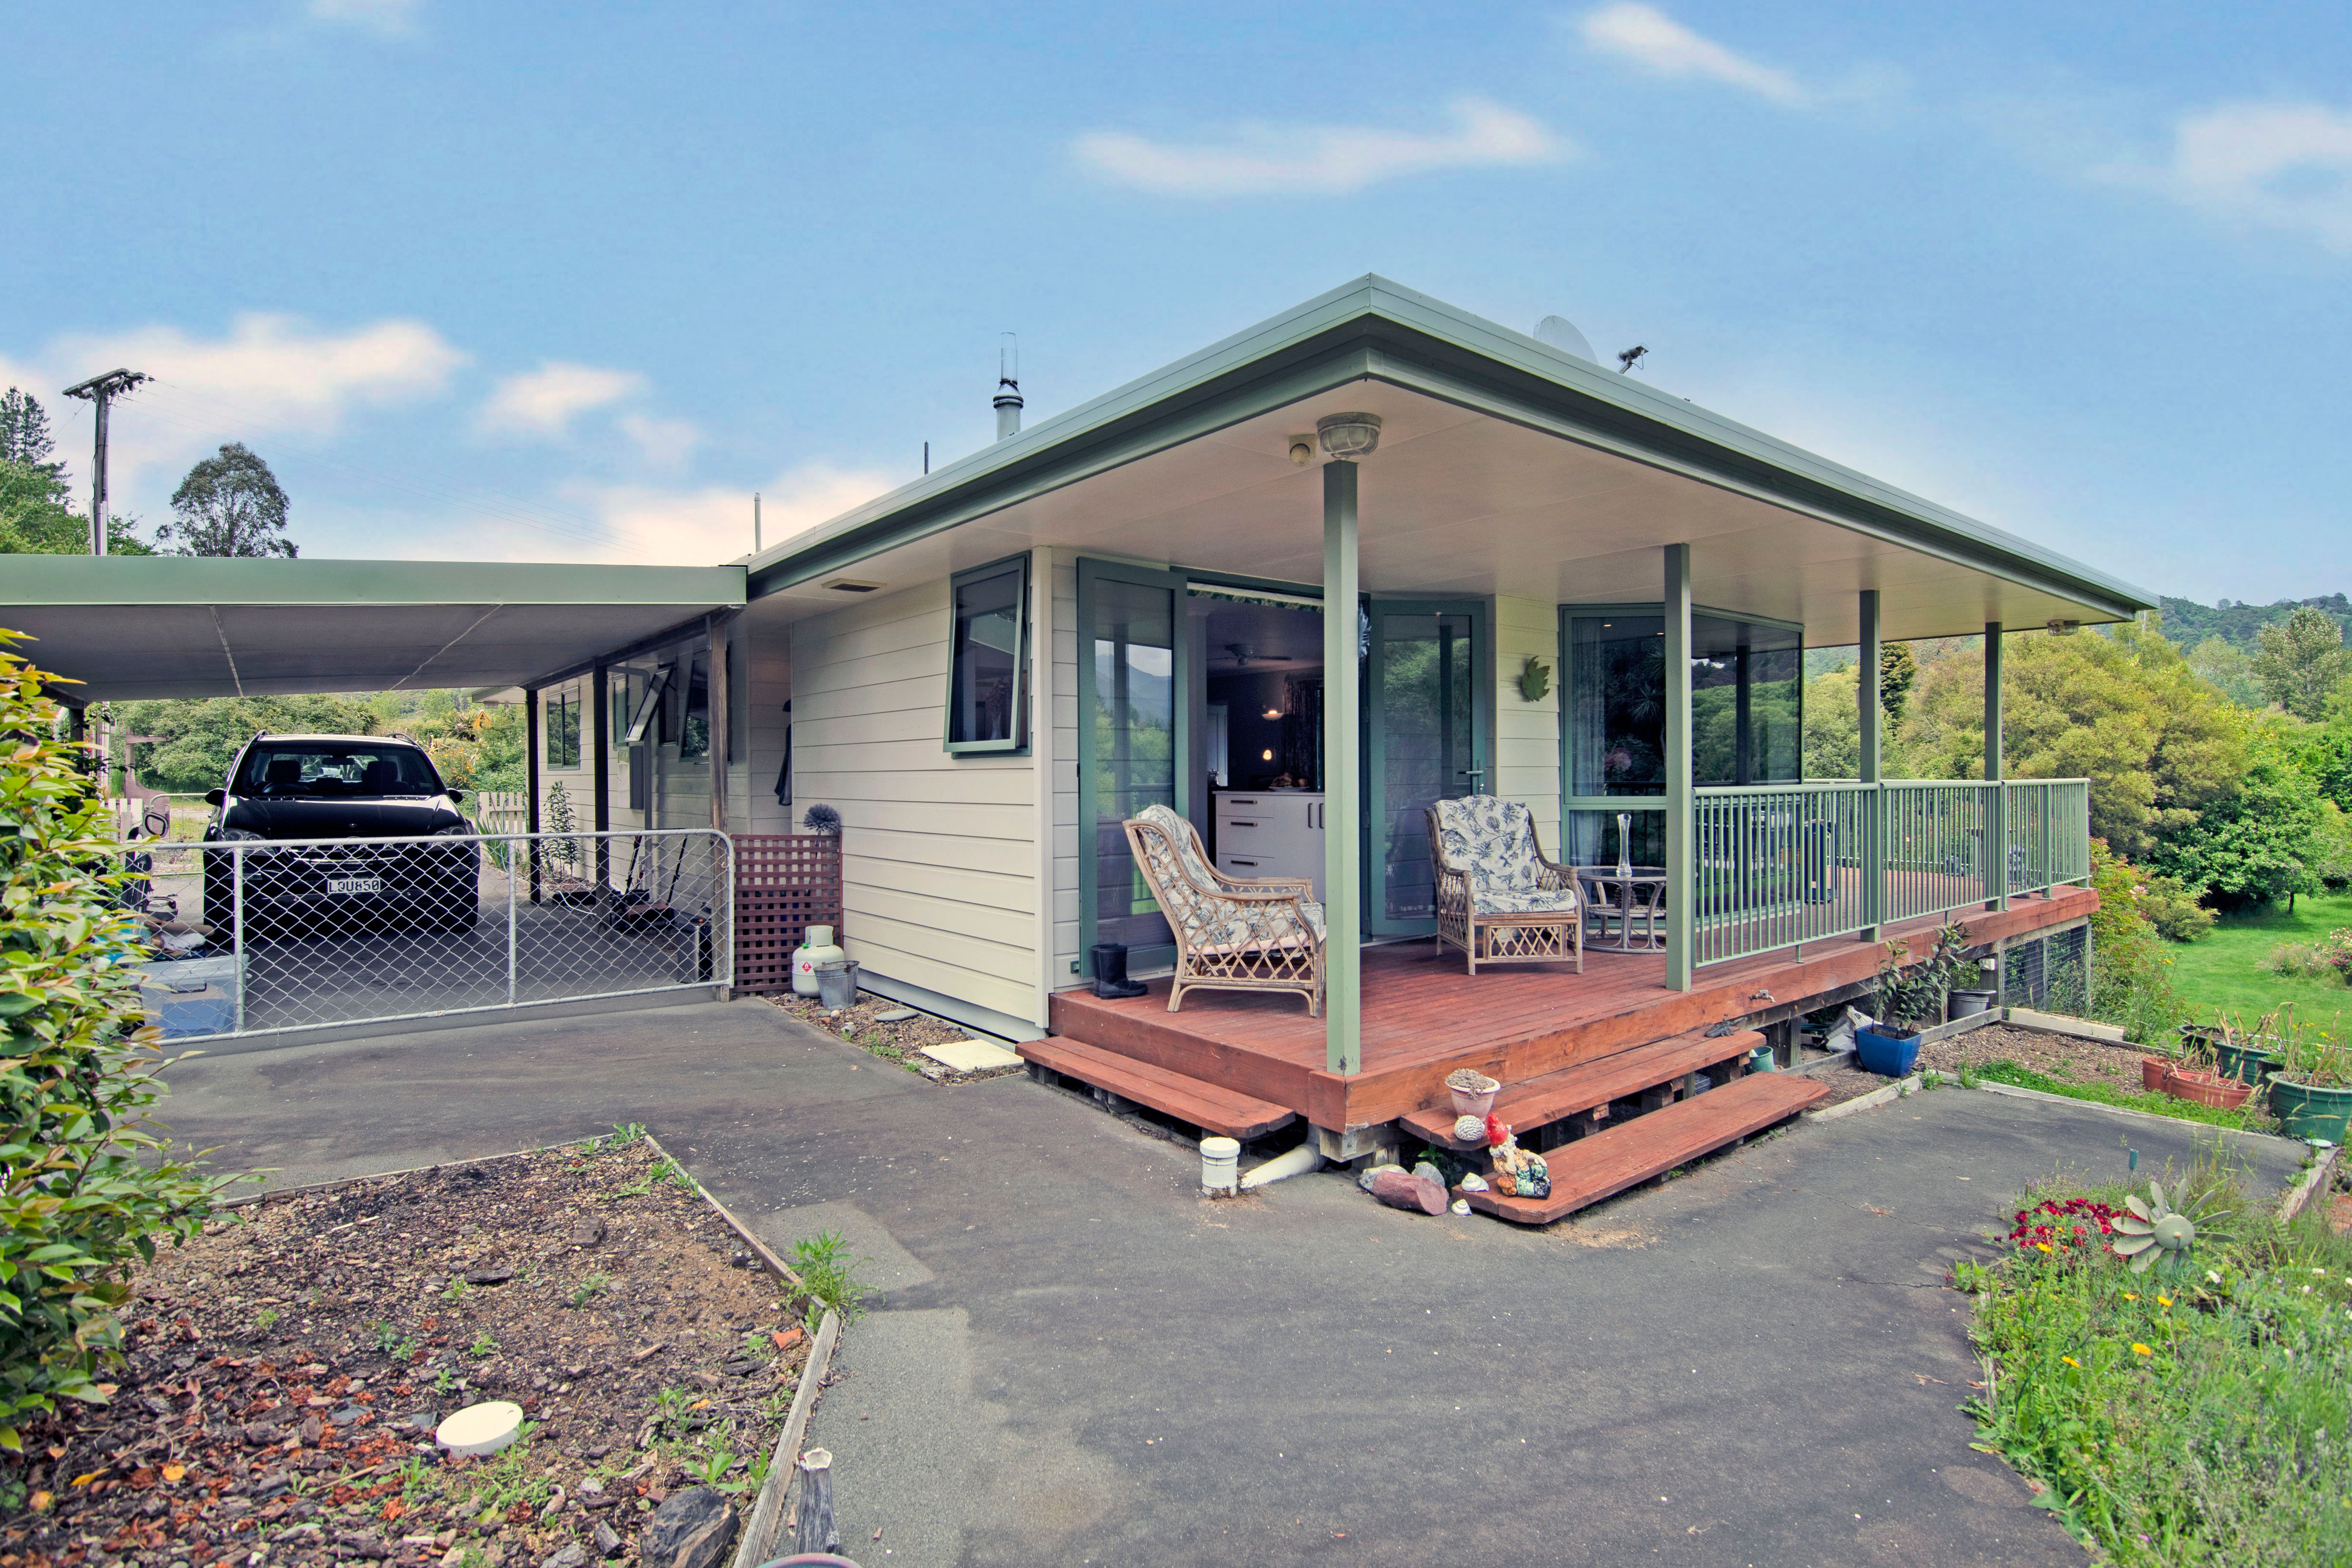 Ideally placed for fishermen, being close to the Motueka River property photo